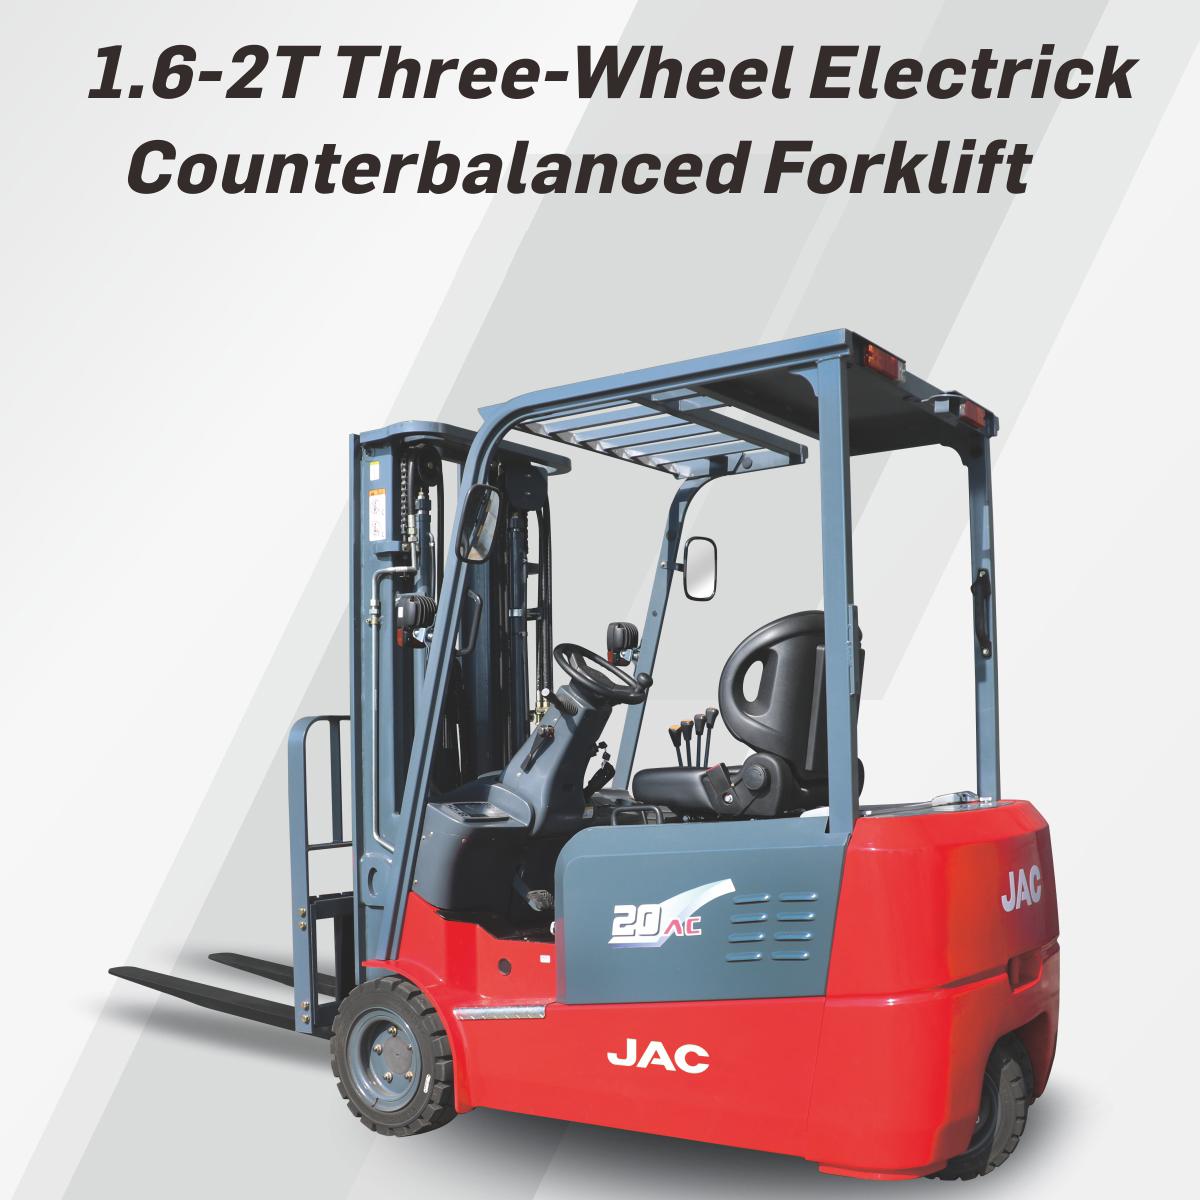 Value Industrial 1.6-2T Three-wheel Electric Forklift